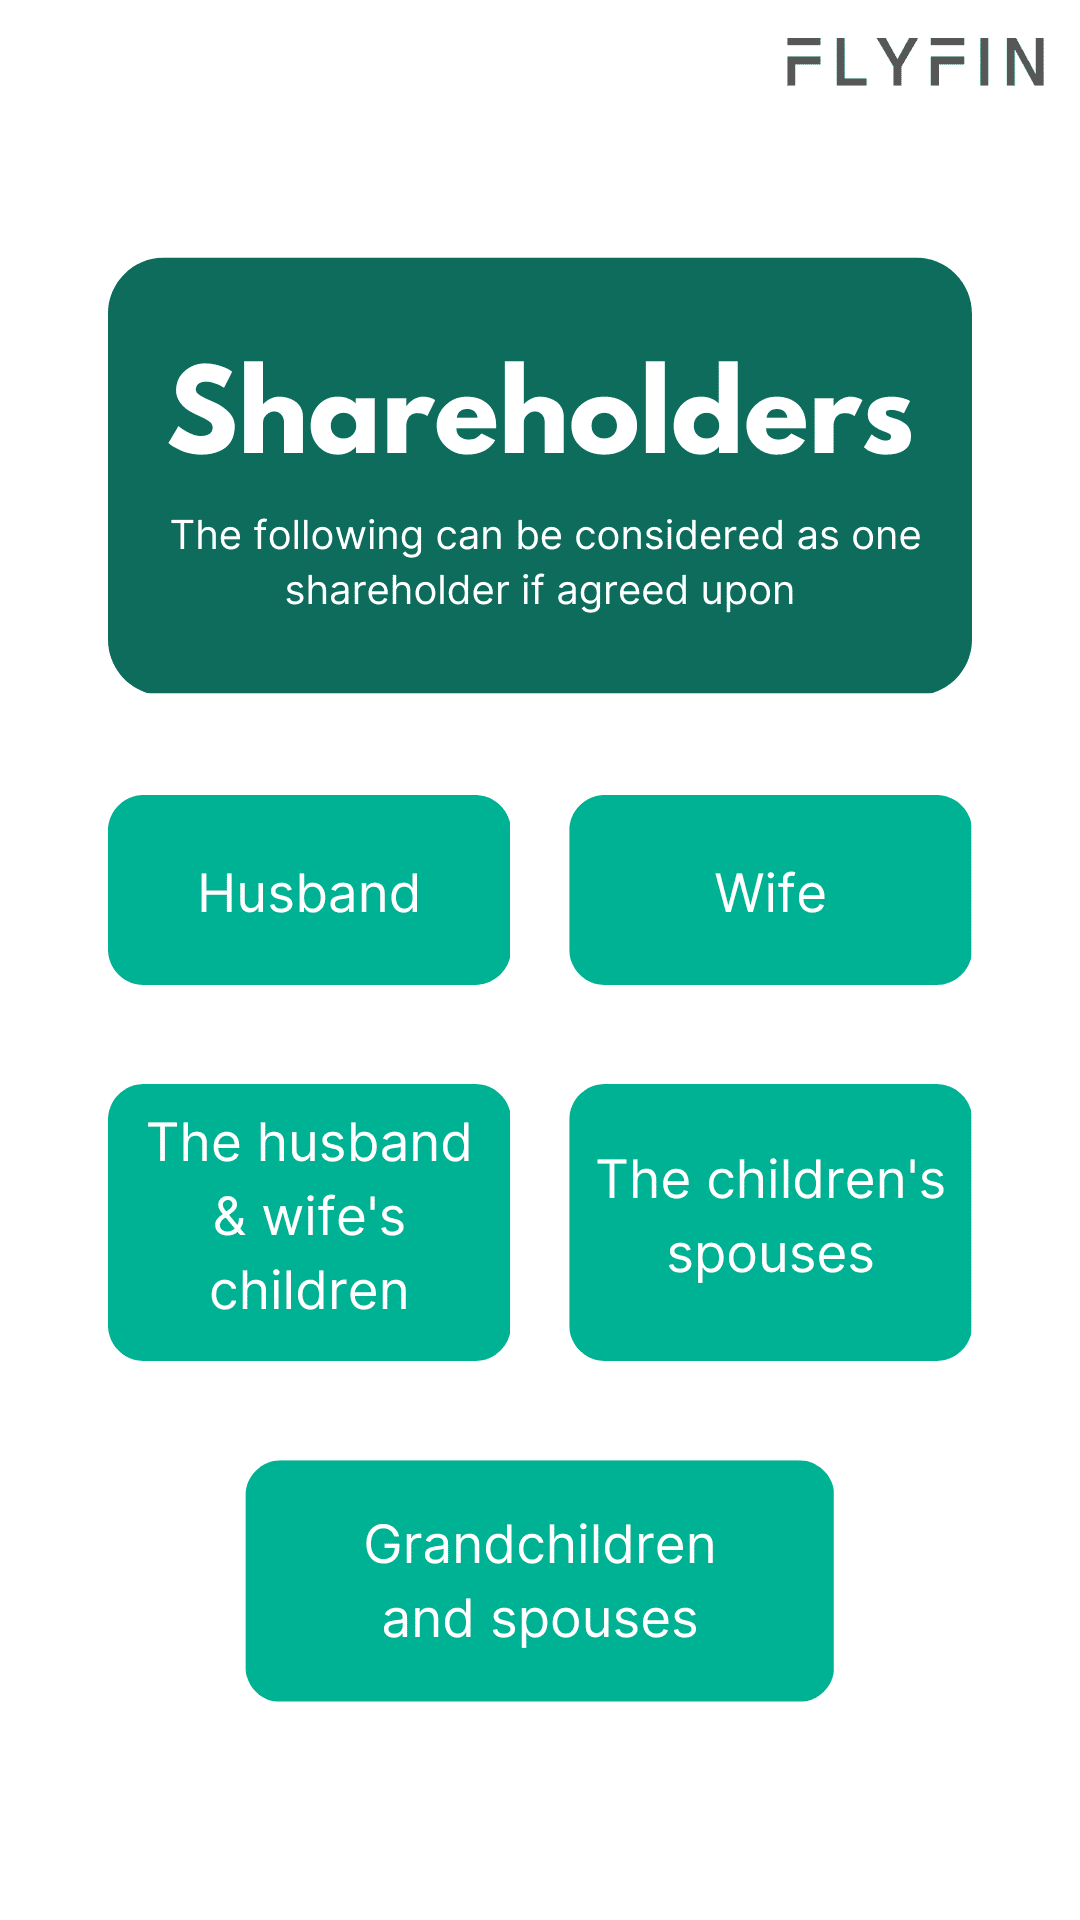 Image explaining shareholders and their relations. Includes husband, wife, children, grandchildren, and their spouses. No mention of self-employment, 1099, freelancer, or taxes.